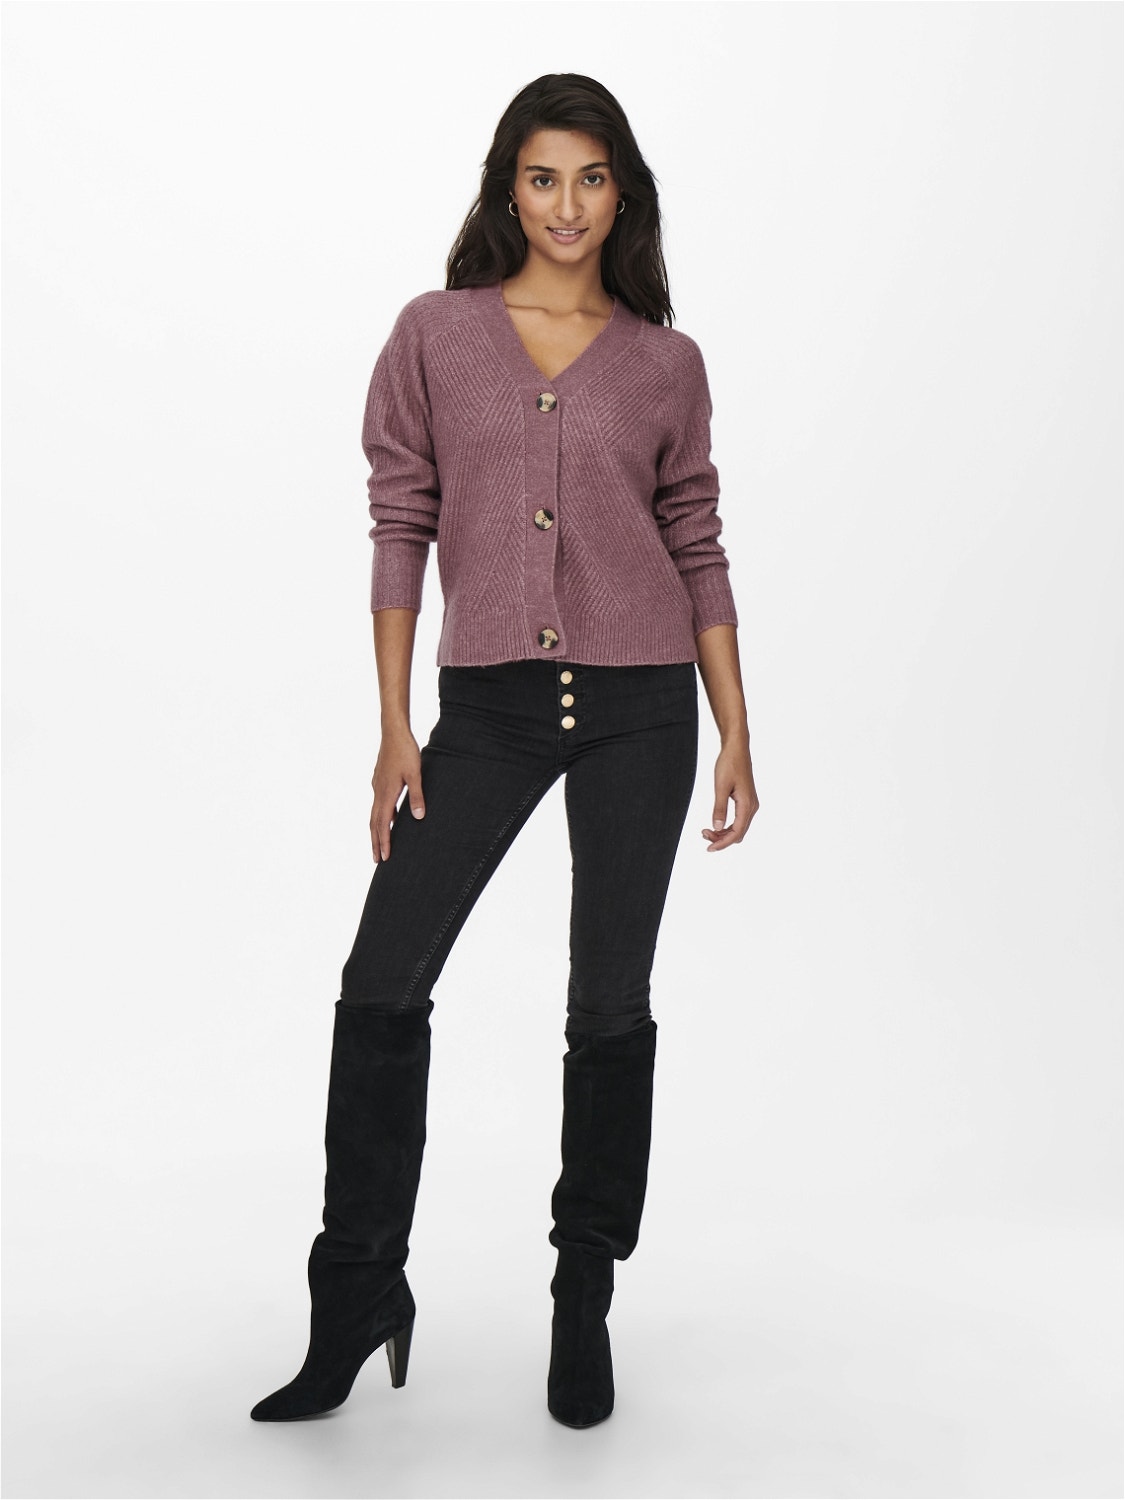 ONLY Regular Fit V-Neck Ribbed cuffs Volume sleeves Knit Cardigan -Crushed Berry - 15196734